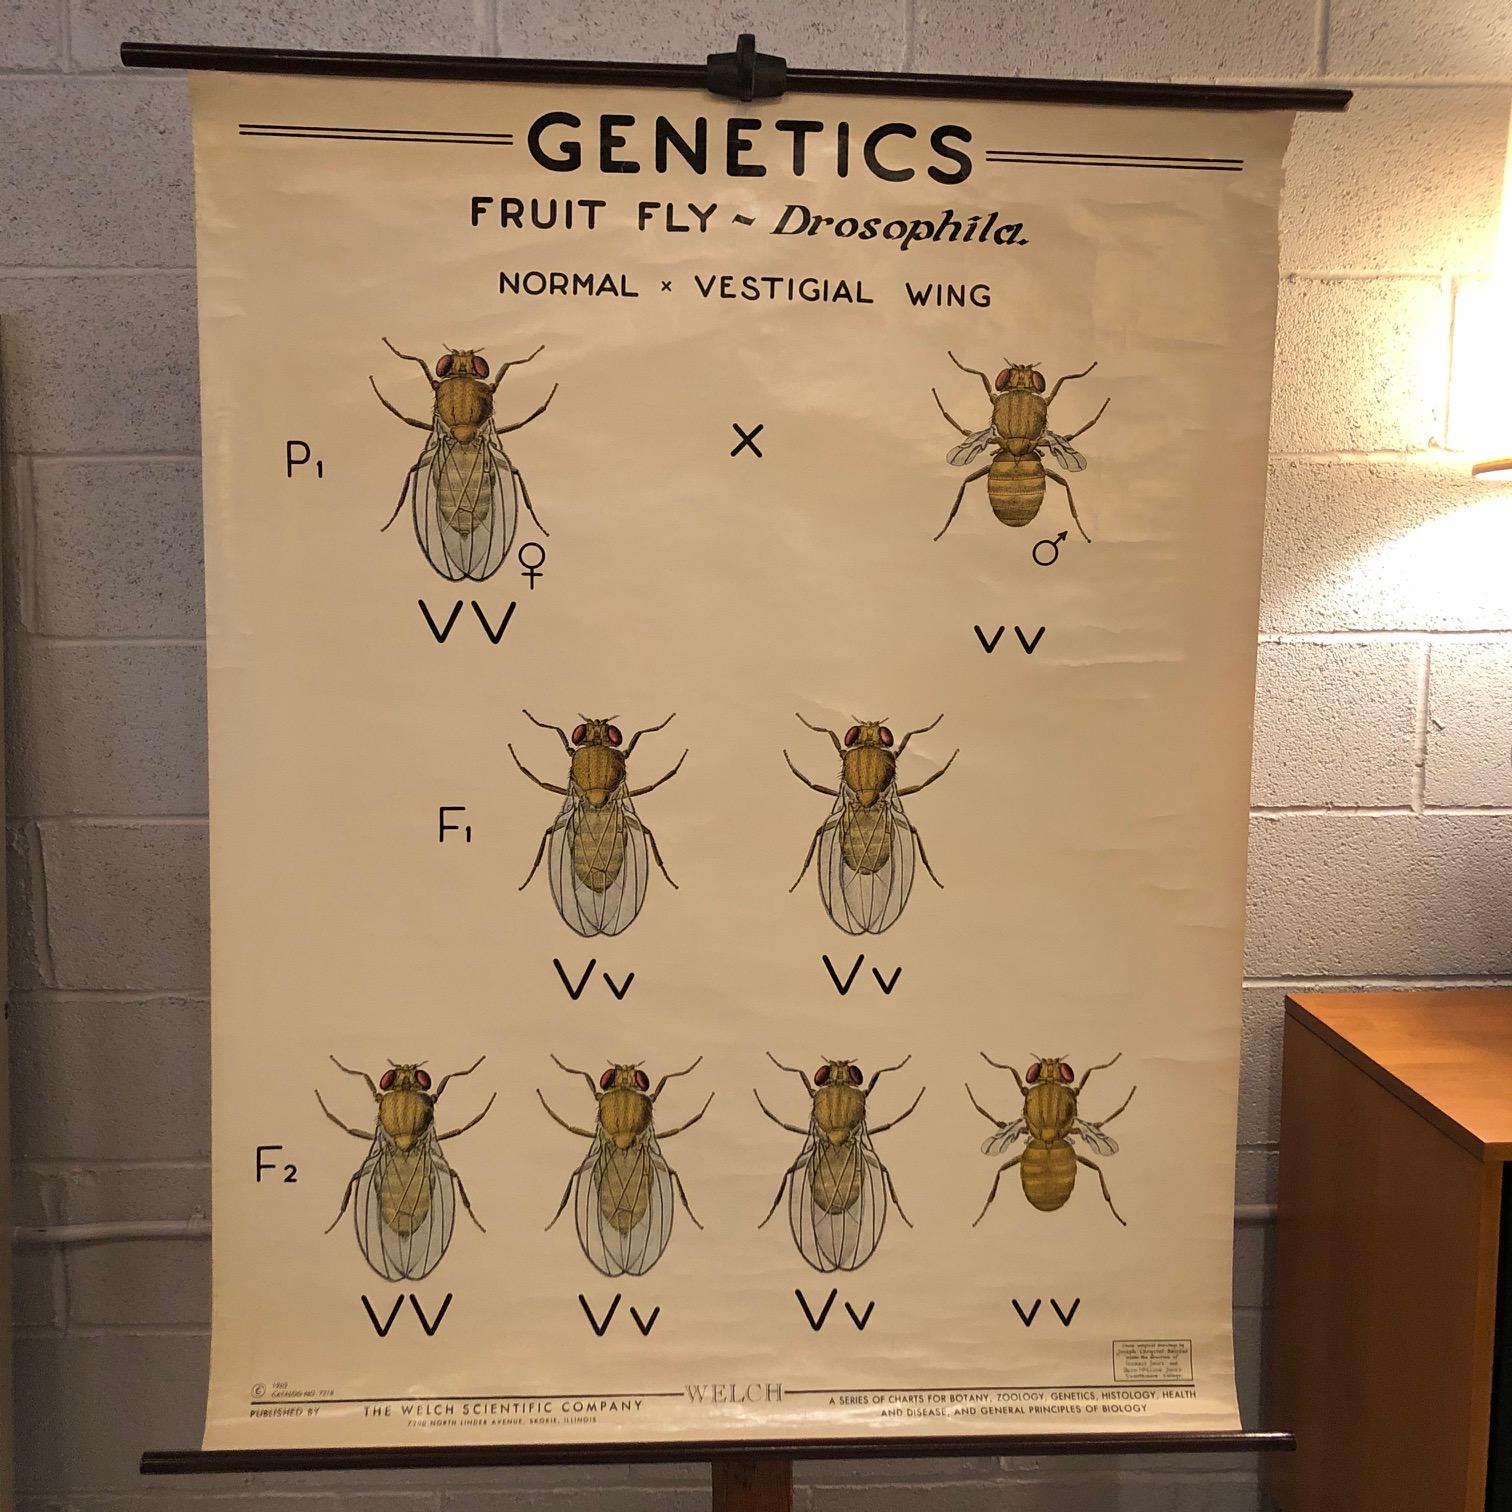 Educational, zoological, roll-up chart depicting drosophila / fruit fly genetics by The Welch Scientific Company is printed on fortified paper with canvas backing on stained maple rod with ring for hanging.